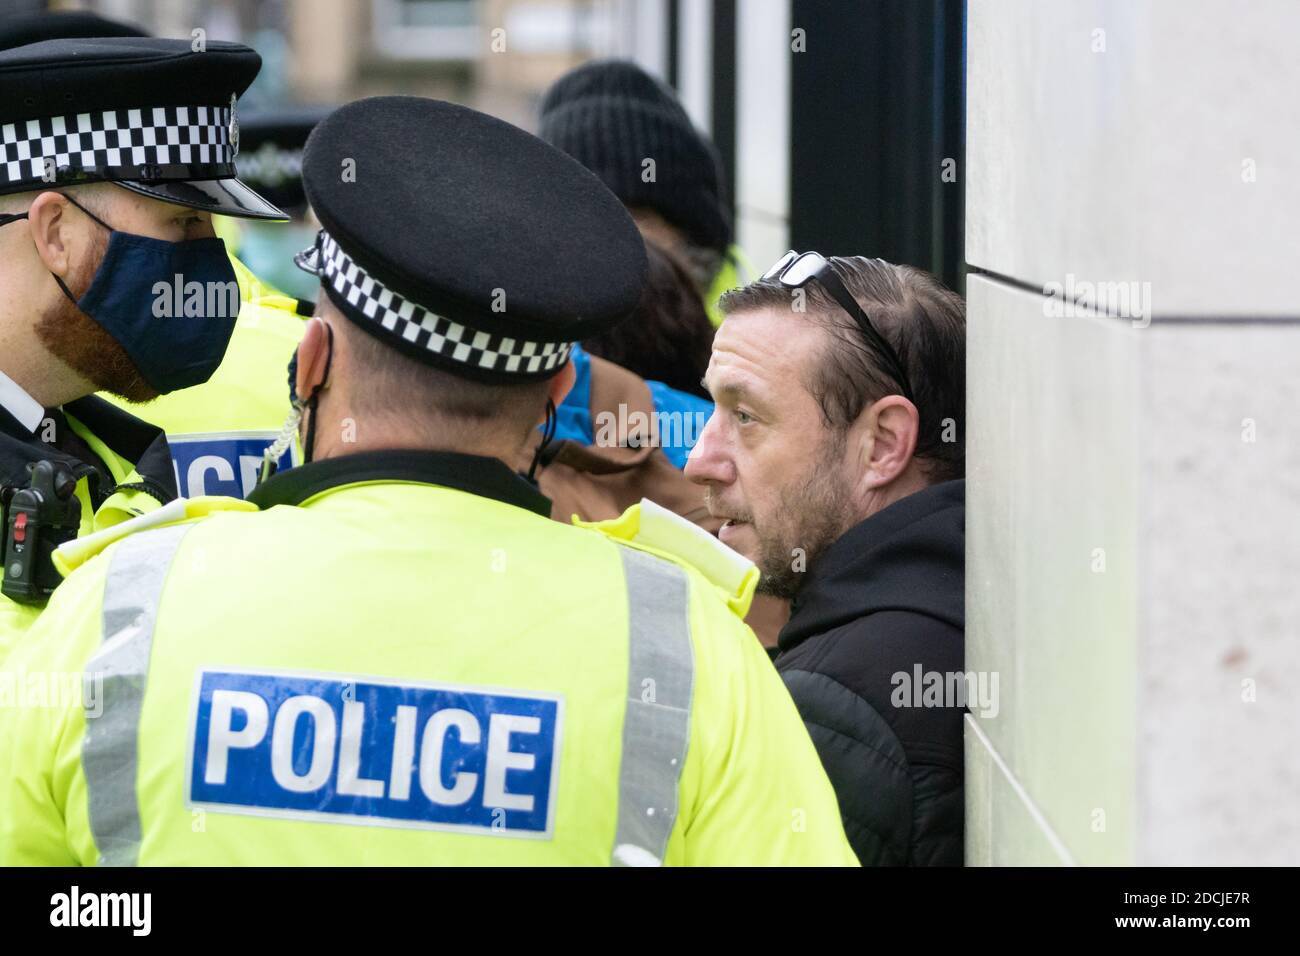 Victoria St, Liverpool, 21st Nov 2020: a man is detained by police during an anti lockdown protest Stock Photo